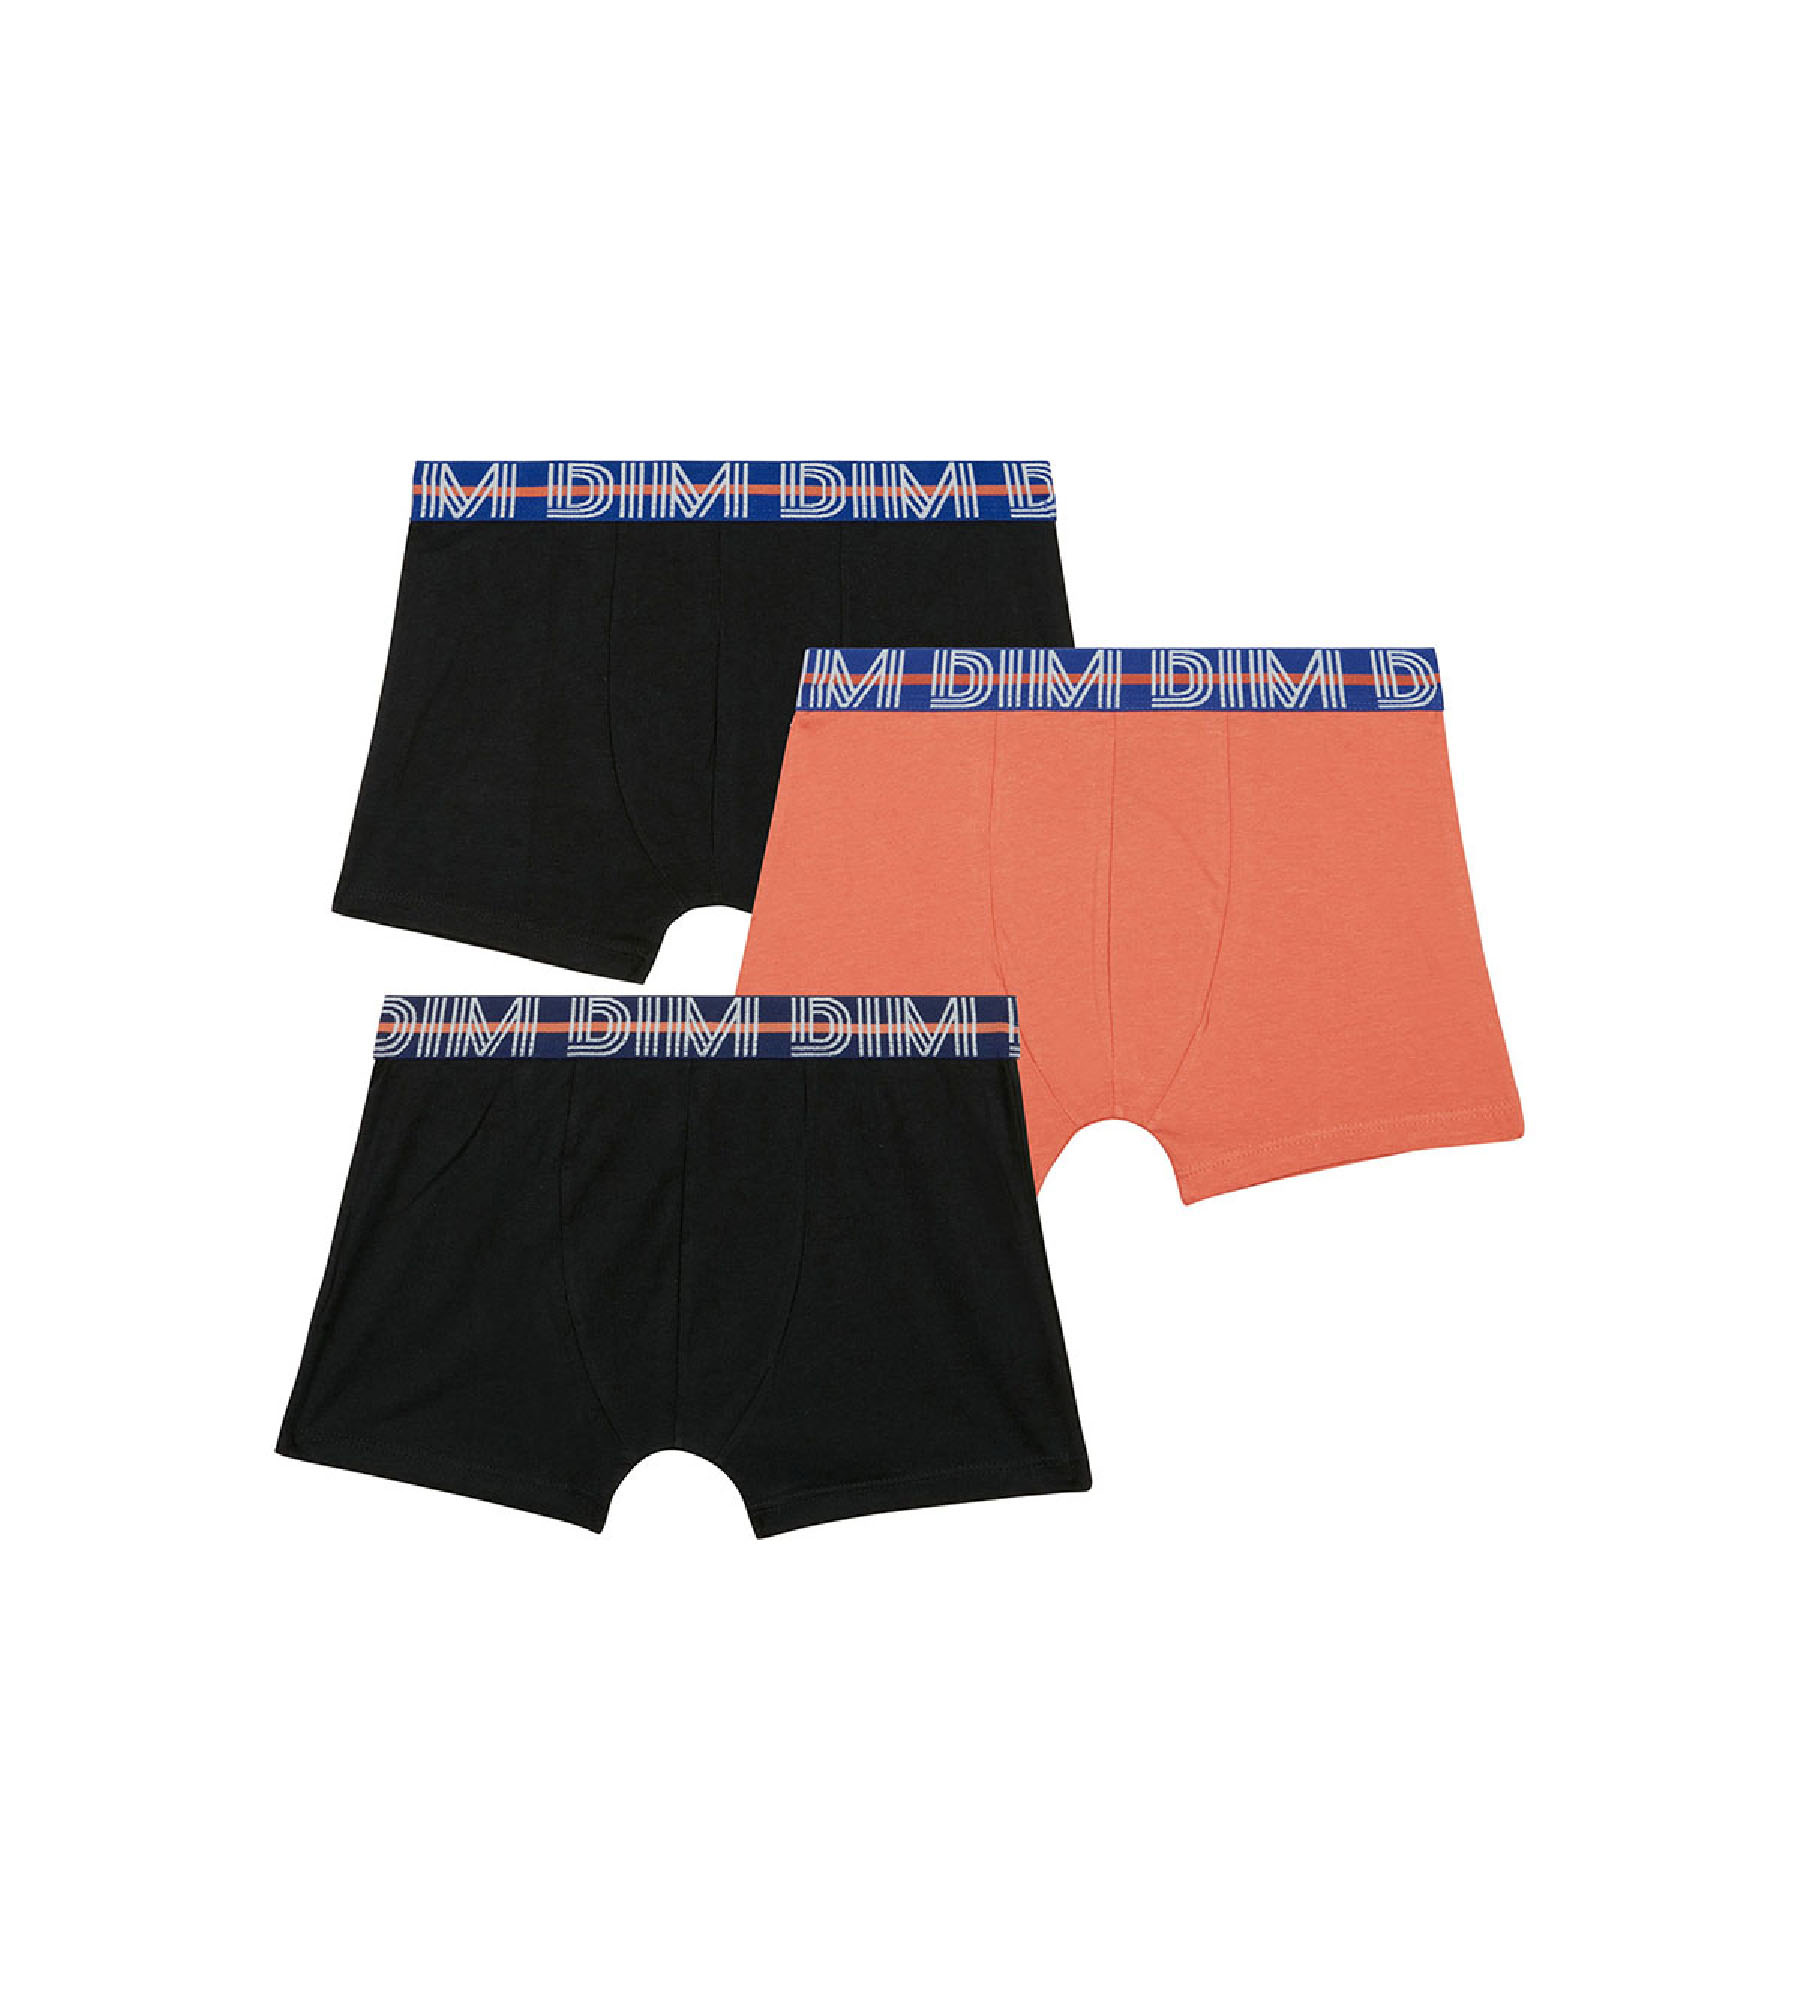 Details about   Fruit of the Loom Boy’s Boxer Briefs 7 Pack 